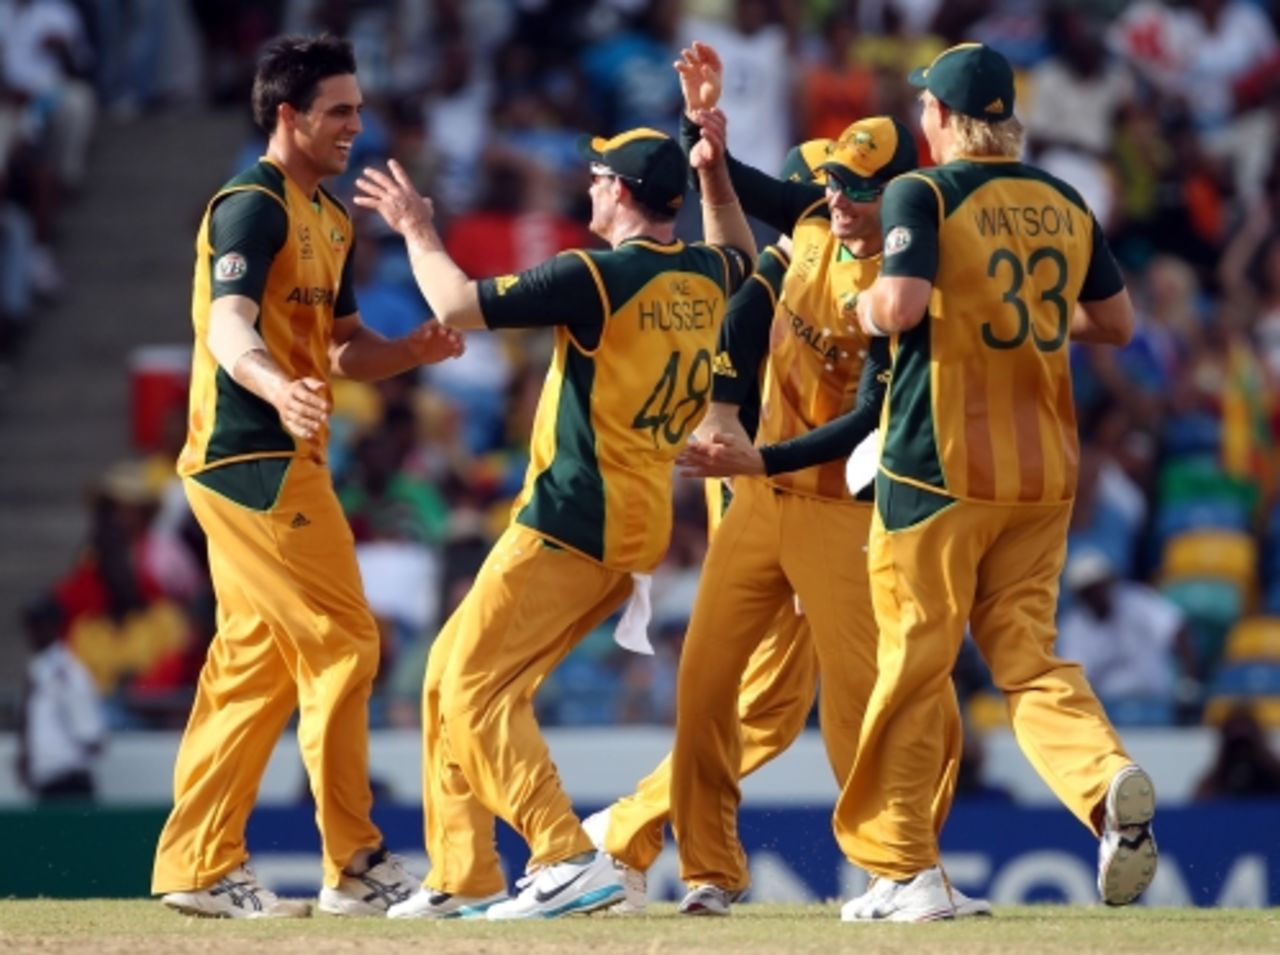 Mitchell Johnson returned to wrap up the innings with his third wicket, Australia v Sri Lanka, World T20, Group F, Bridgetown, May 9, 2010